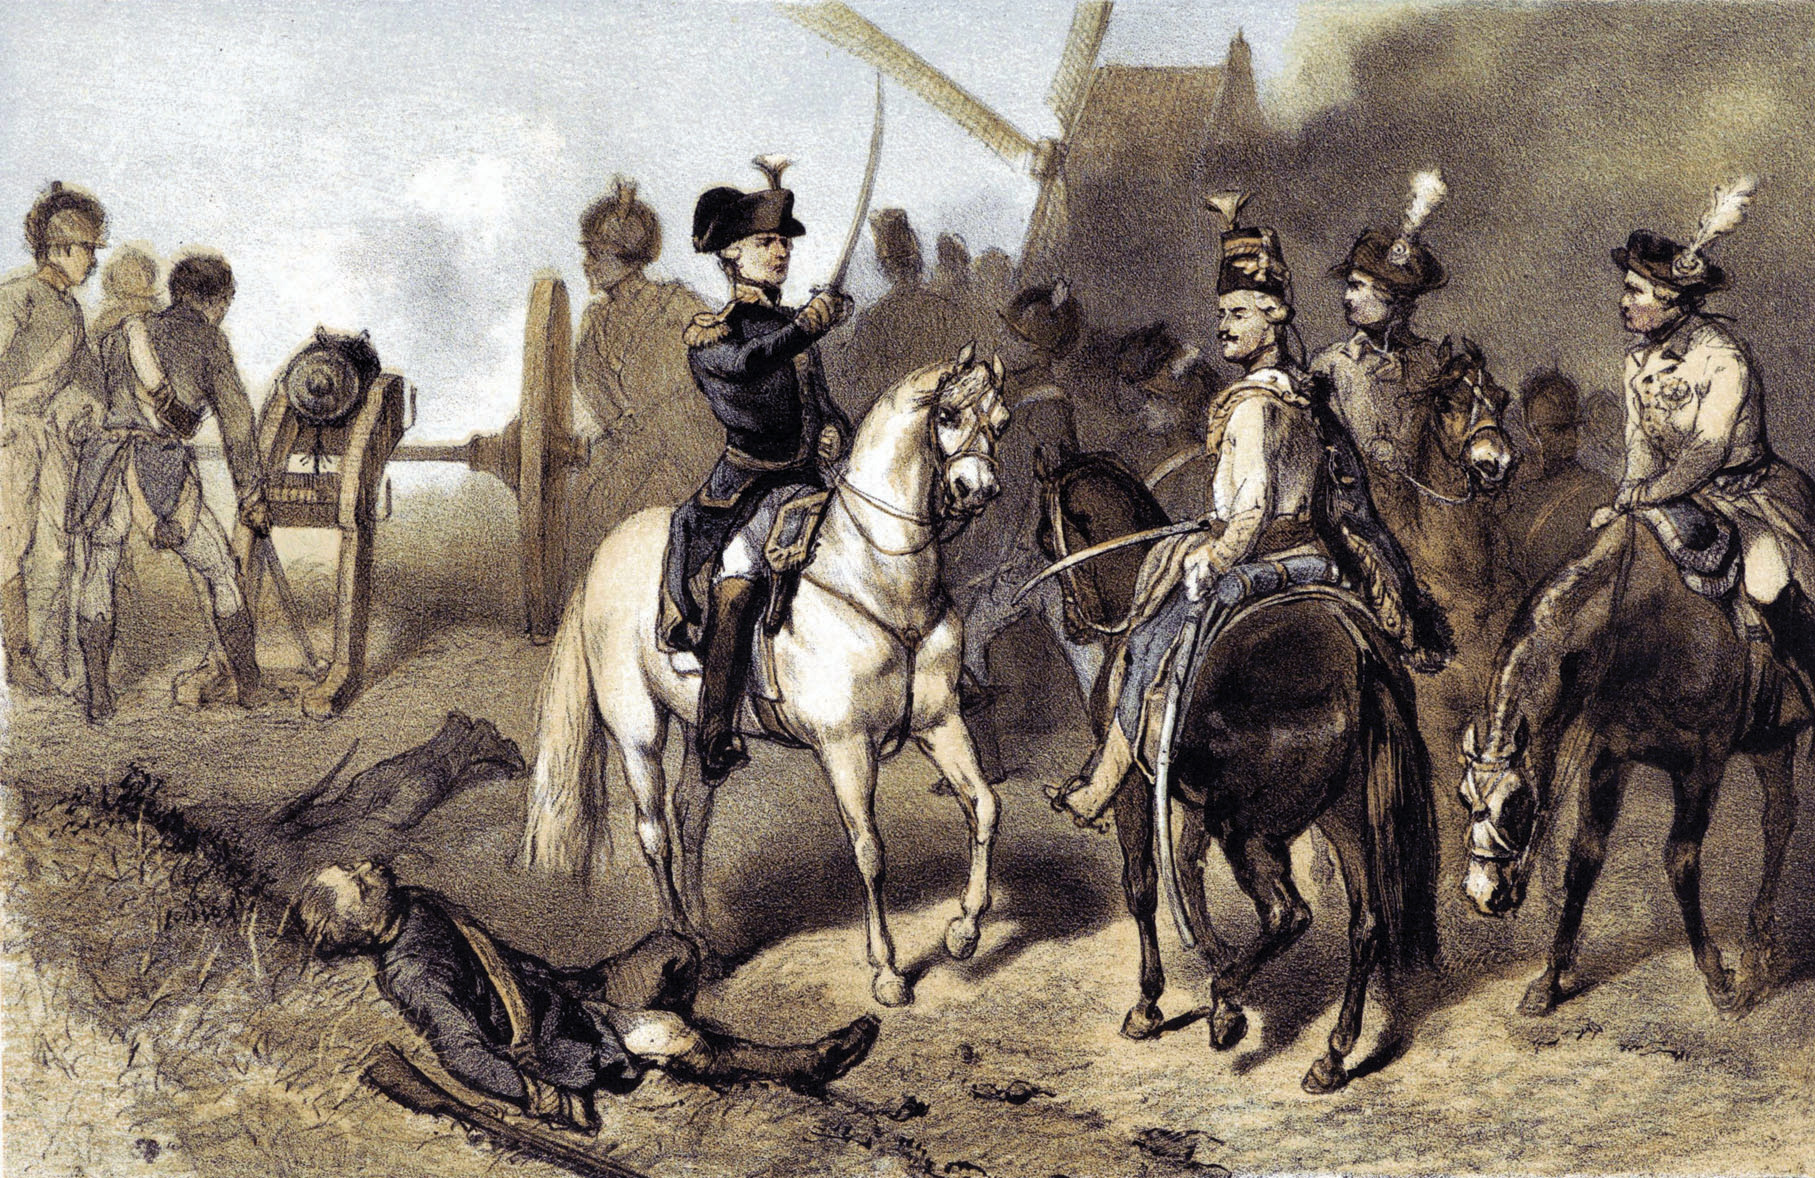 Prince William V of Orange, the Stadholder of the Dutch Republic, is shown with his staff on the grounds of a windmill at Fleurus. His troops were outmatched by the French at Fleurus. 